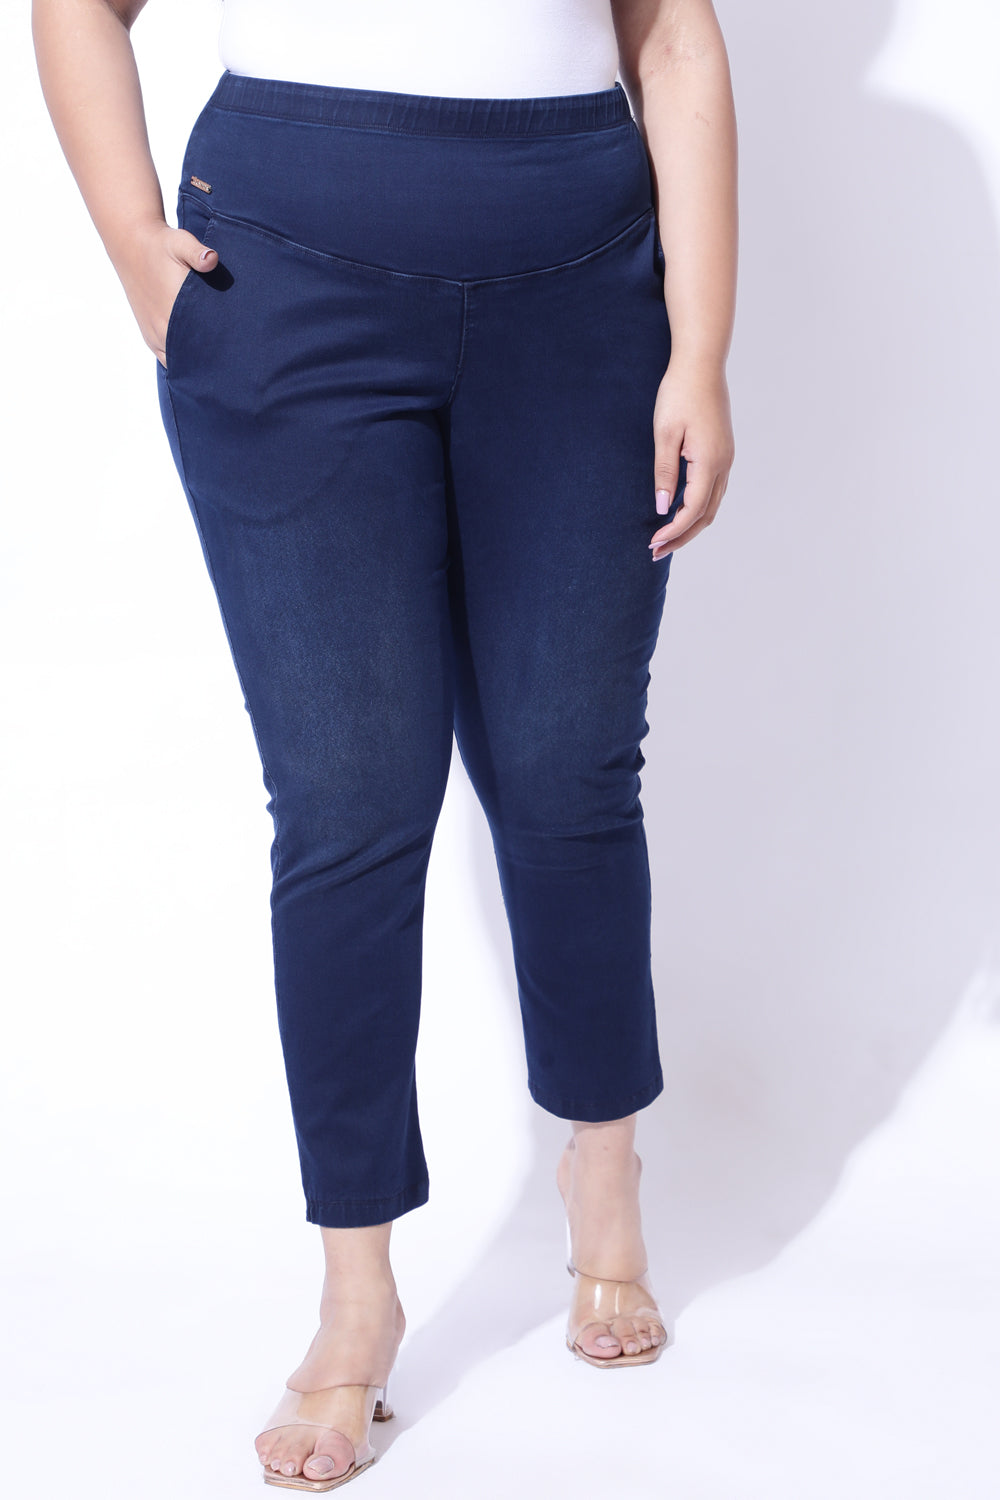 Buy Navy Blue Light Fade Straight Fit Jeans